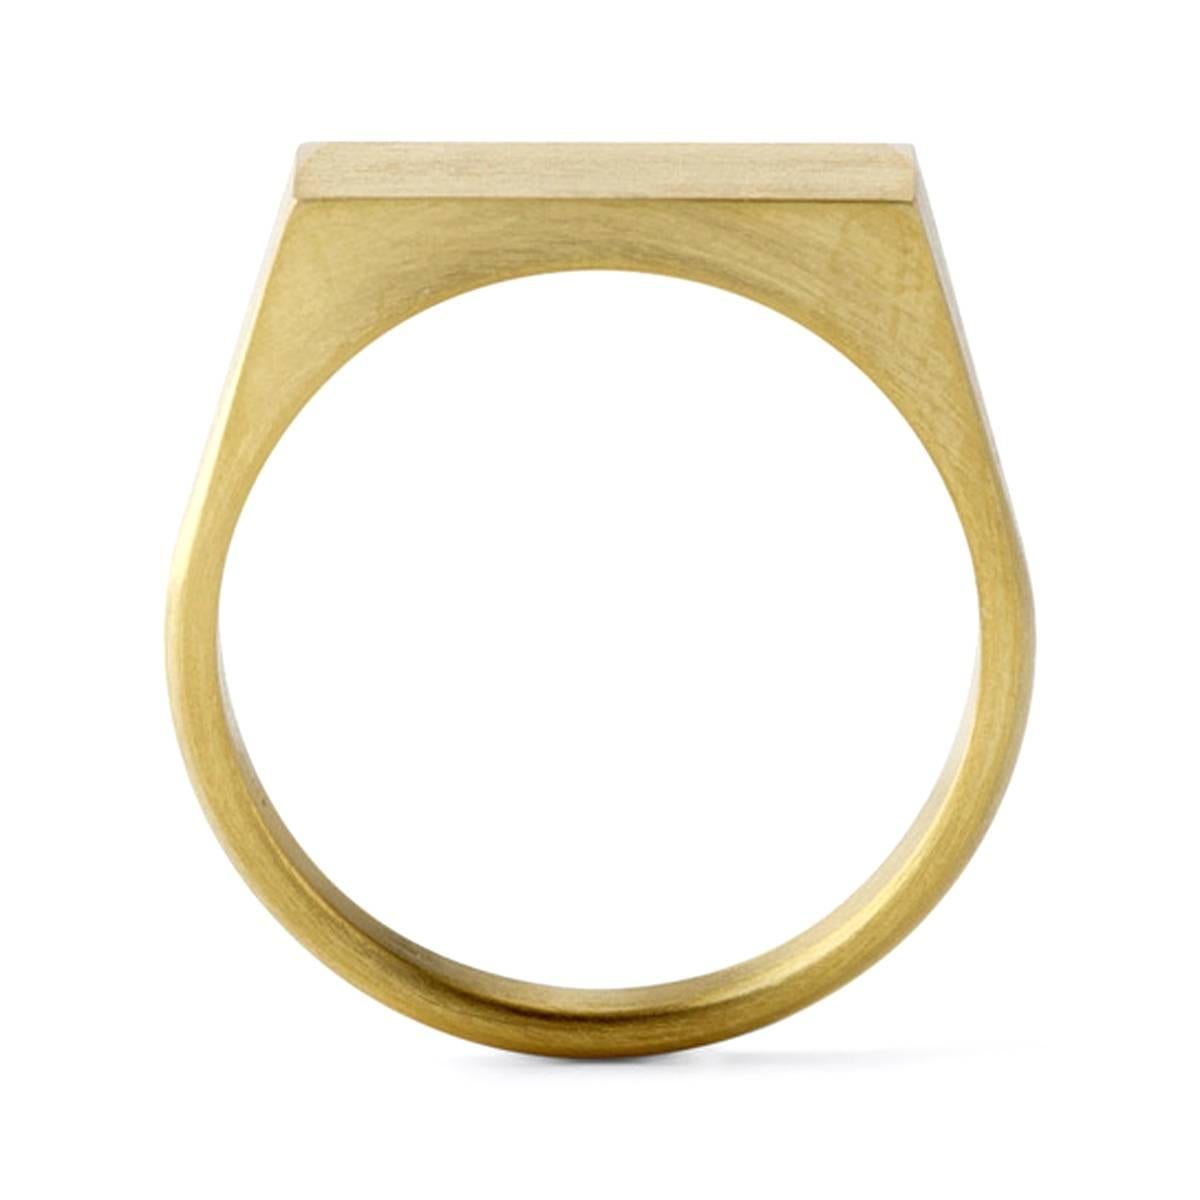 A classic rectangular signet ring made of 18 karat yellow gold. The signet surface and inside the ring band is polished in contrast with the surface of the ring band which is matte. 

Signet top measurements: 14mm x 7.5mm
This item is